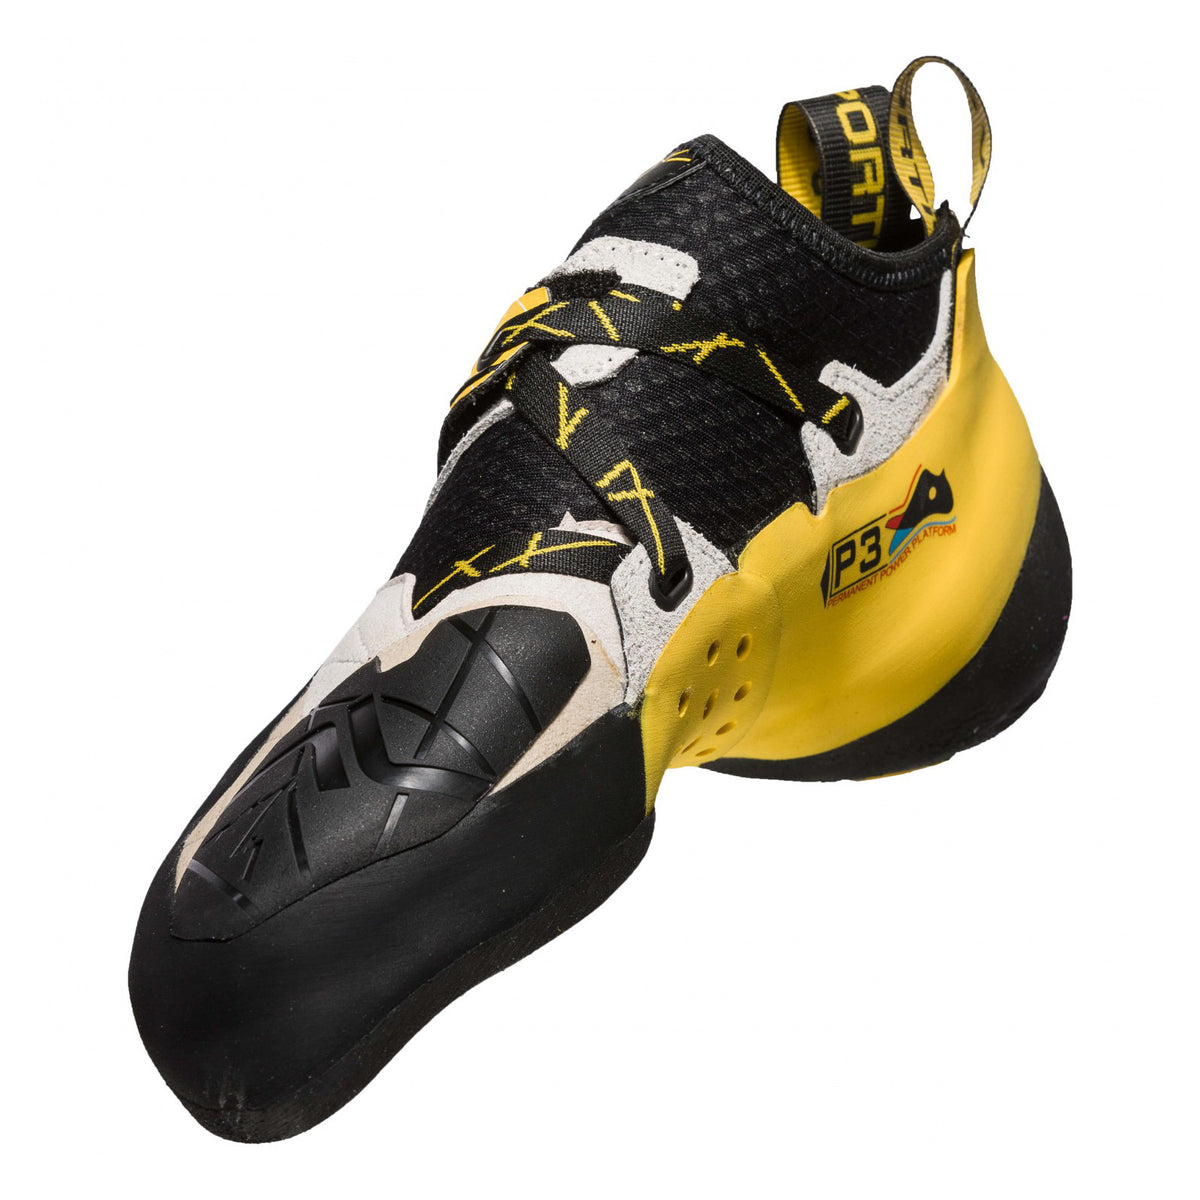 La Sportiva Solution climbing shoe, view from the inside showing the downturn